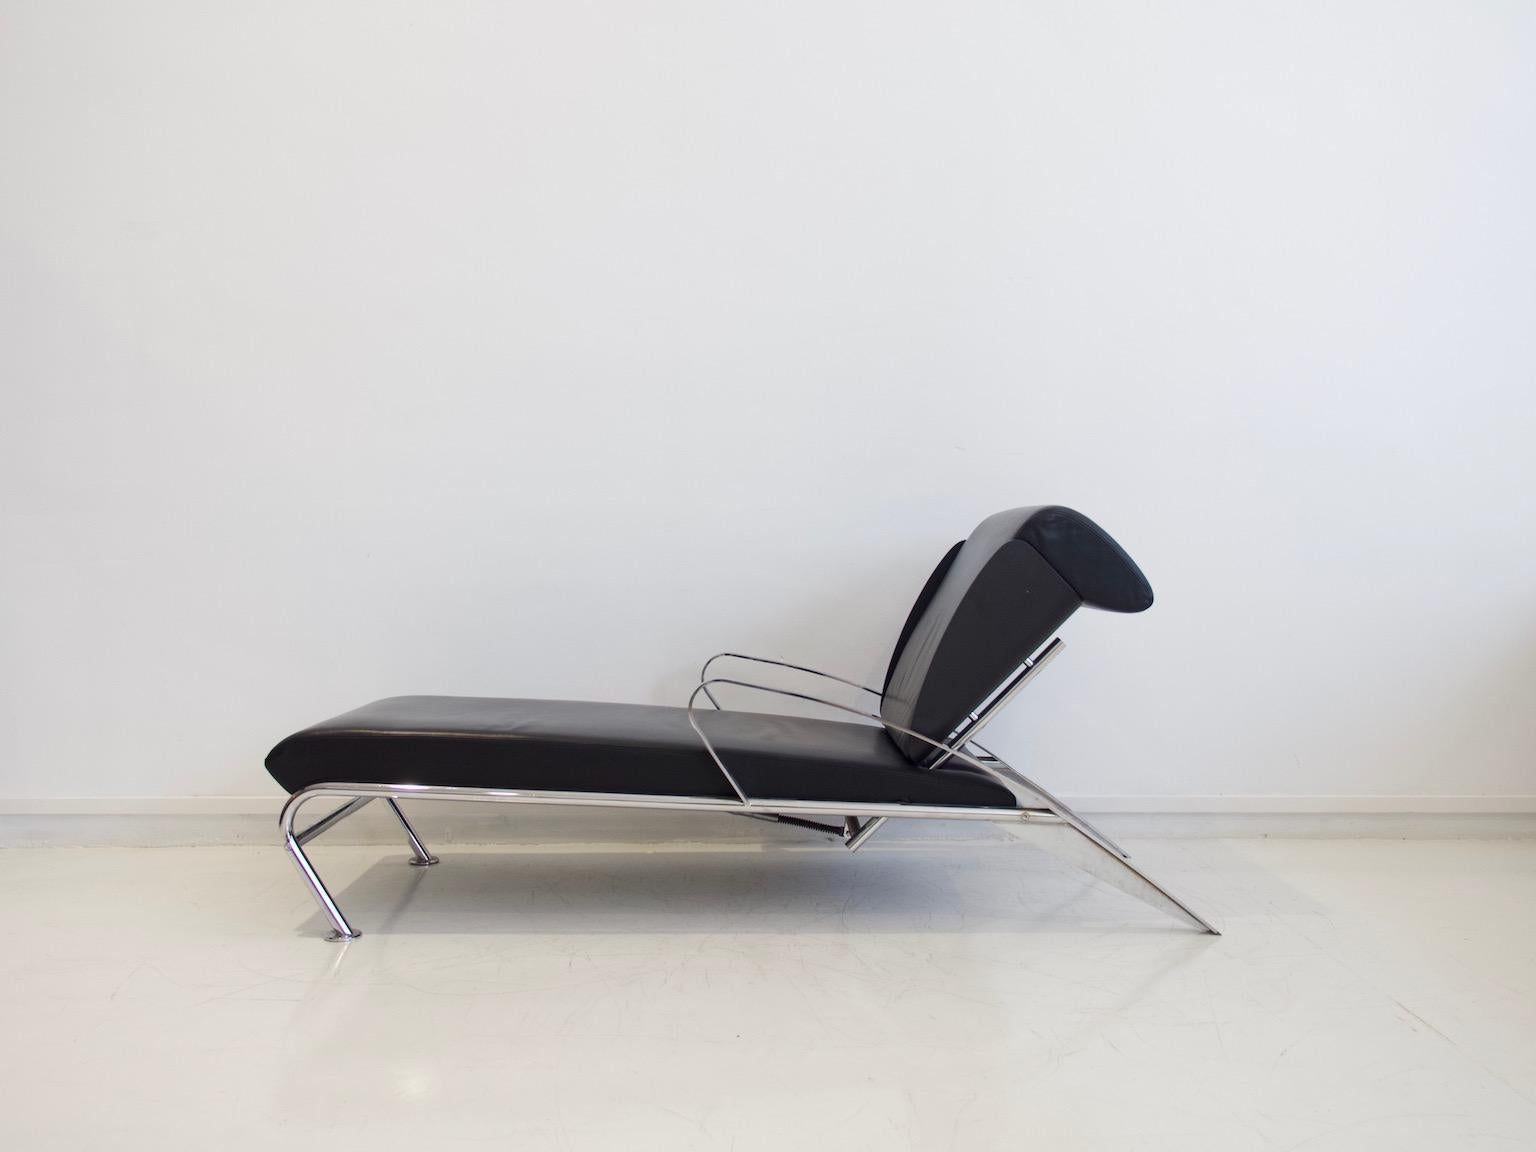 Chaise lounge designed by Massimo Iosa Ghini (born 1959) and manufactured by Moroso, Italian design of the 1980s. Adjustable construction made of chromed flat and round steel. Molded plywood shell in black lacquer and covers made of black leather.